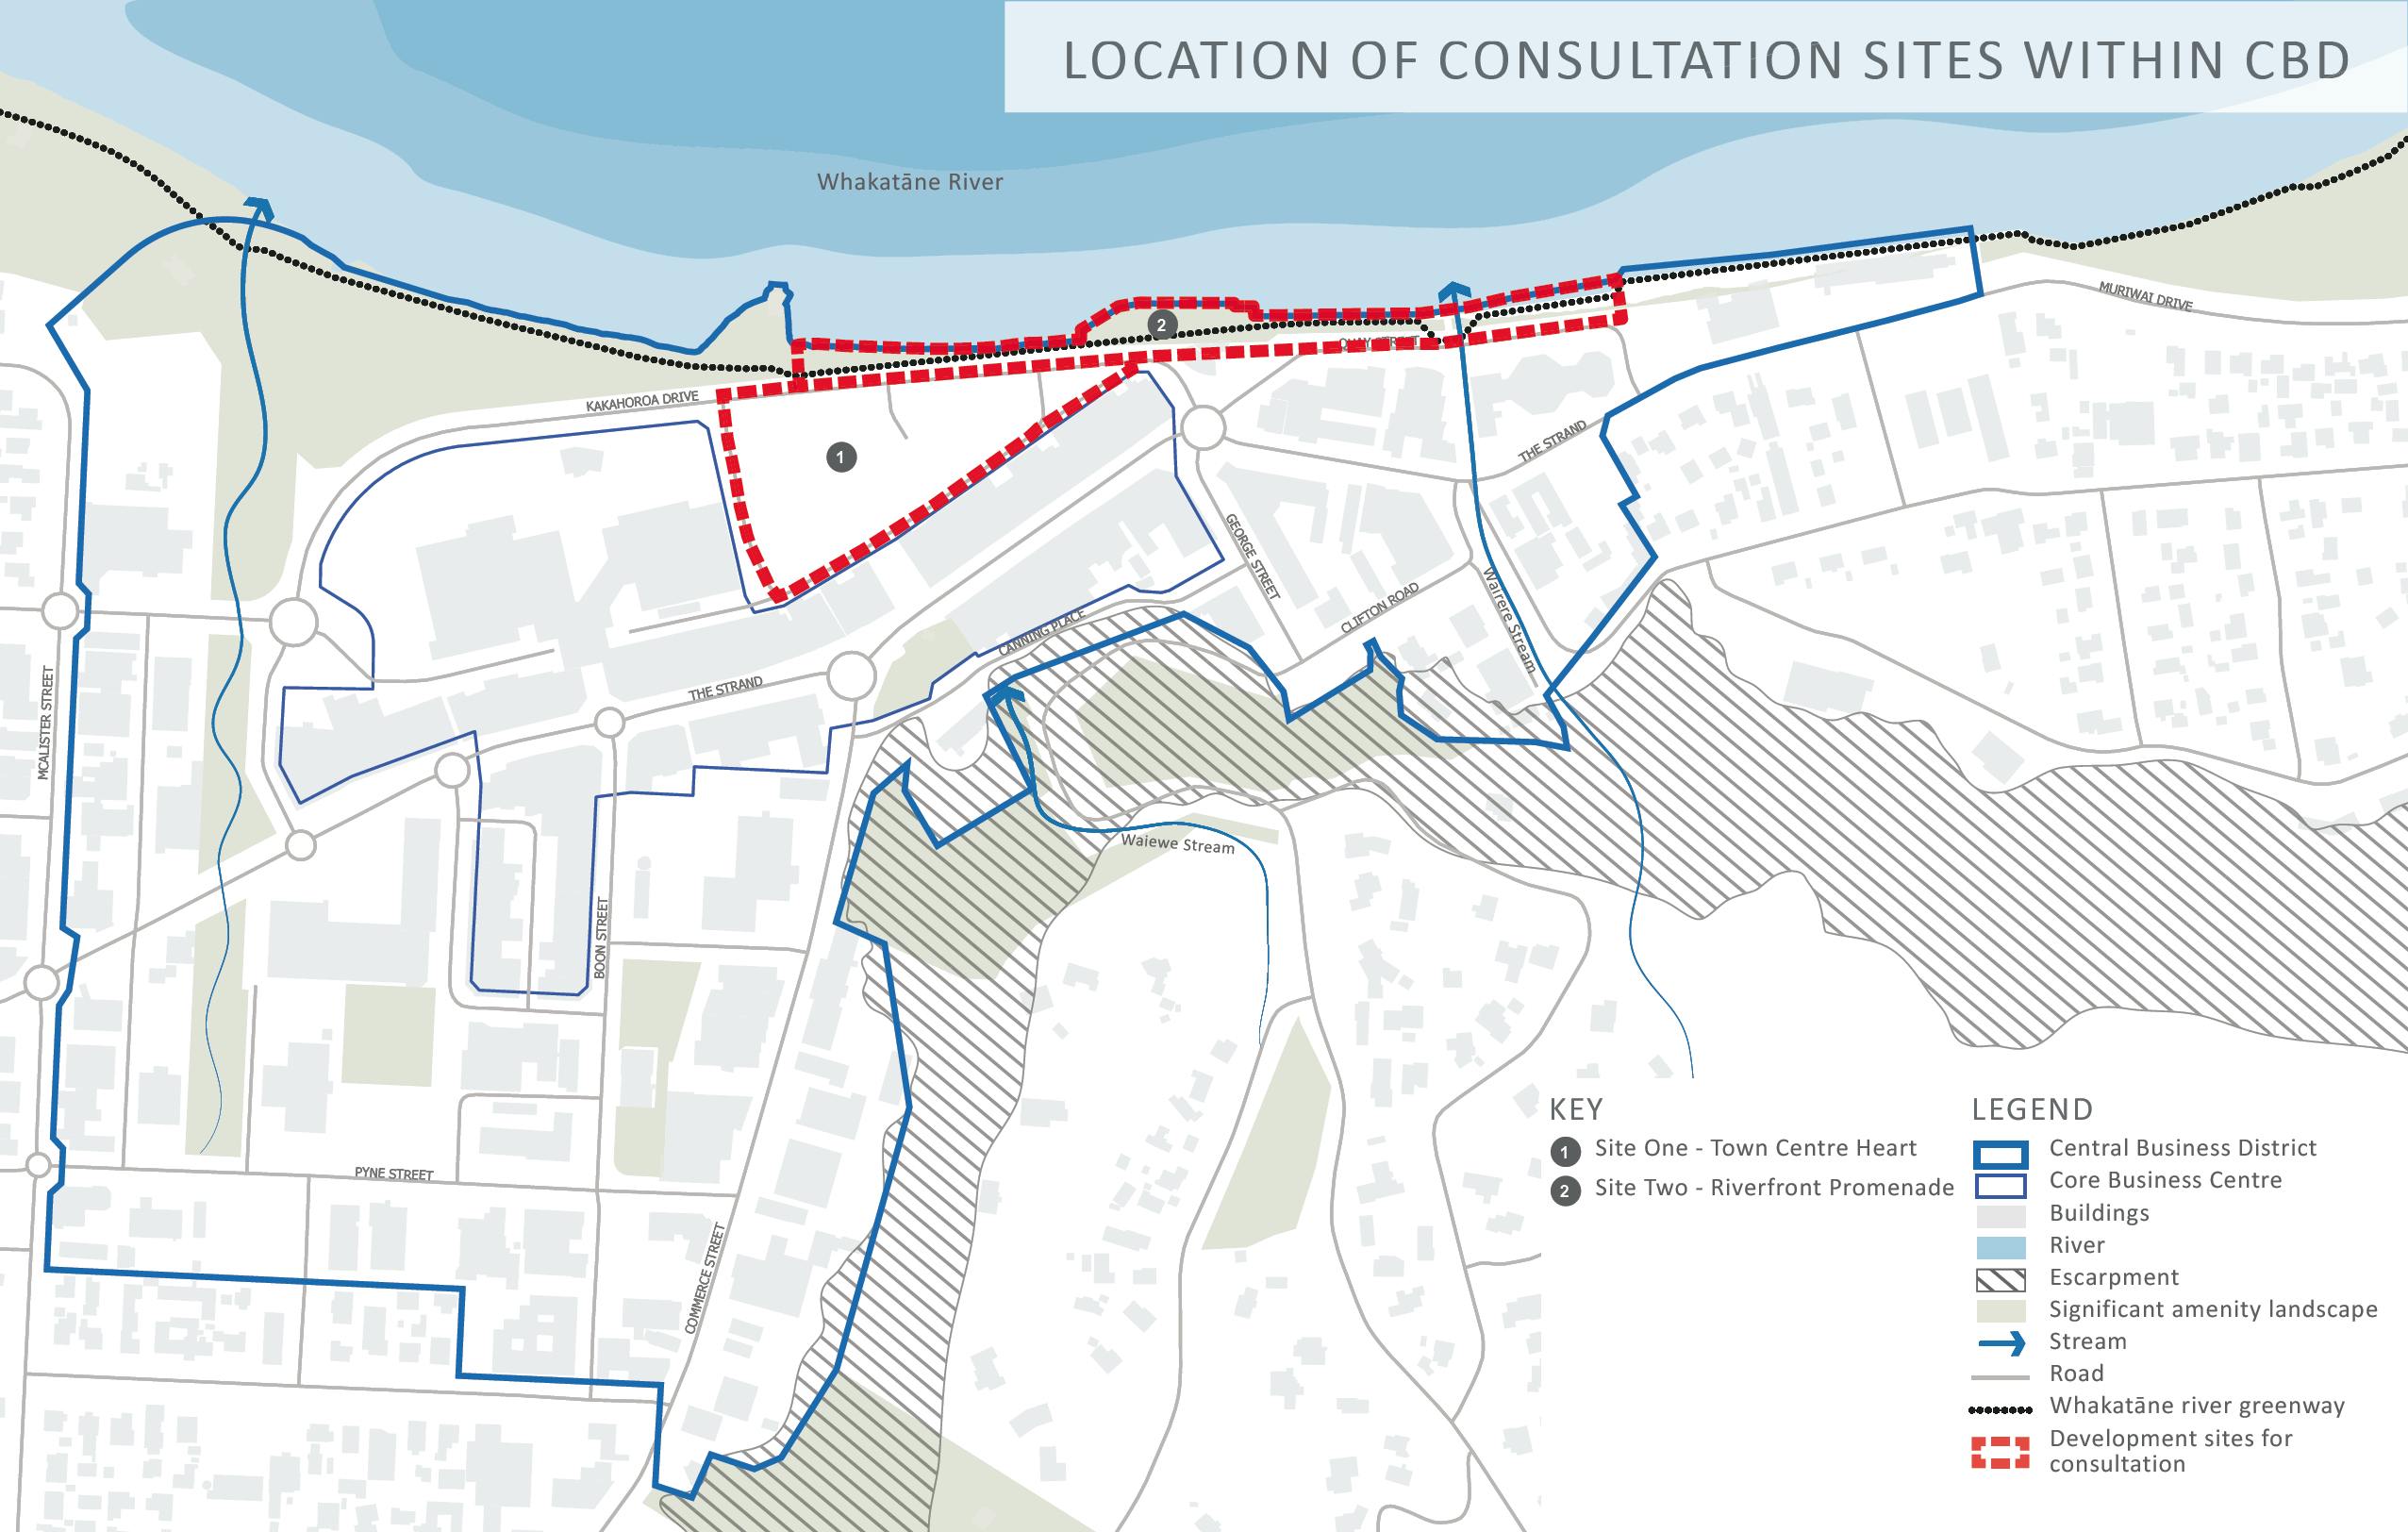 Map showing location of consultation sites within CBD